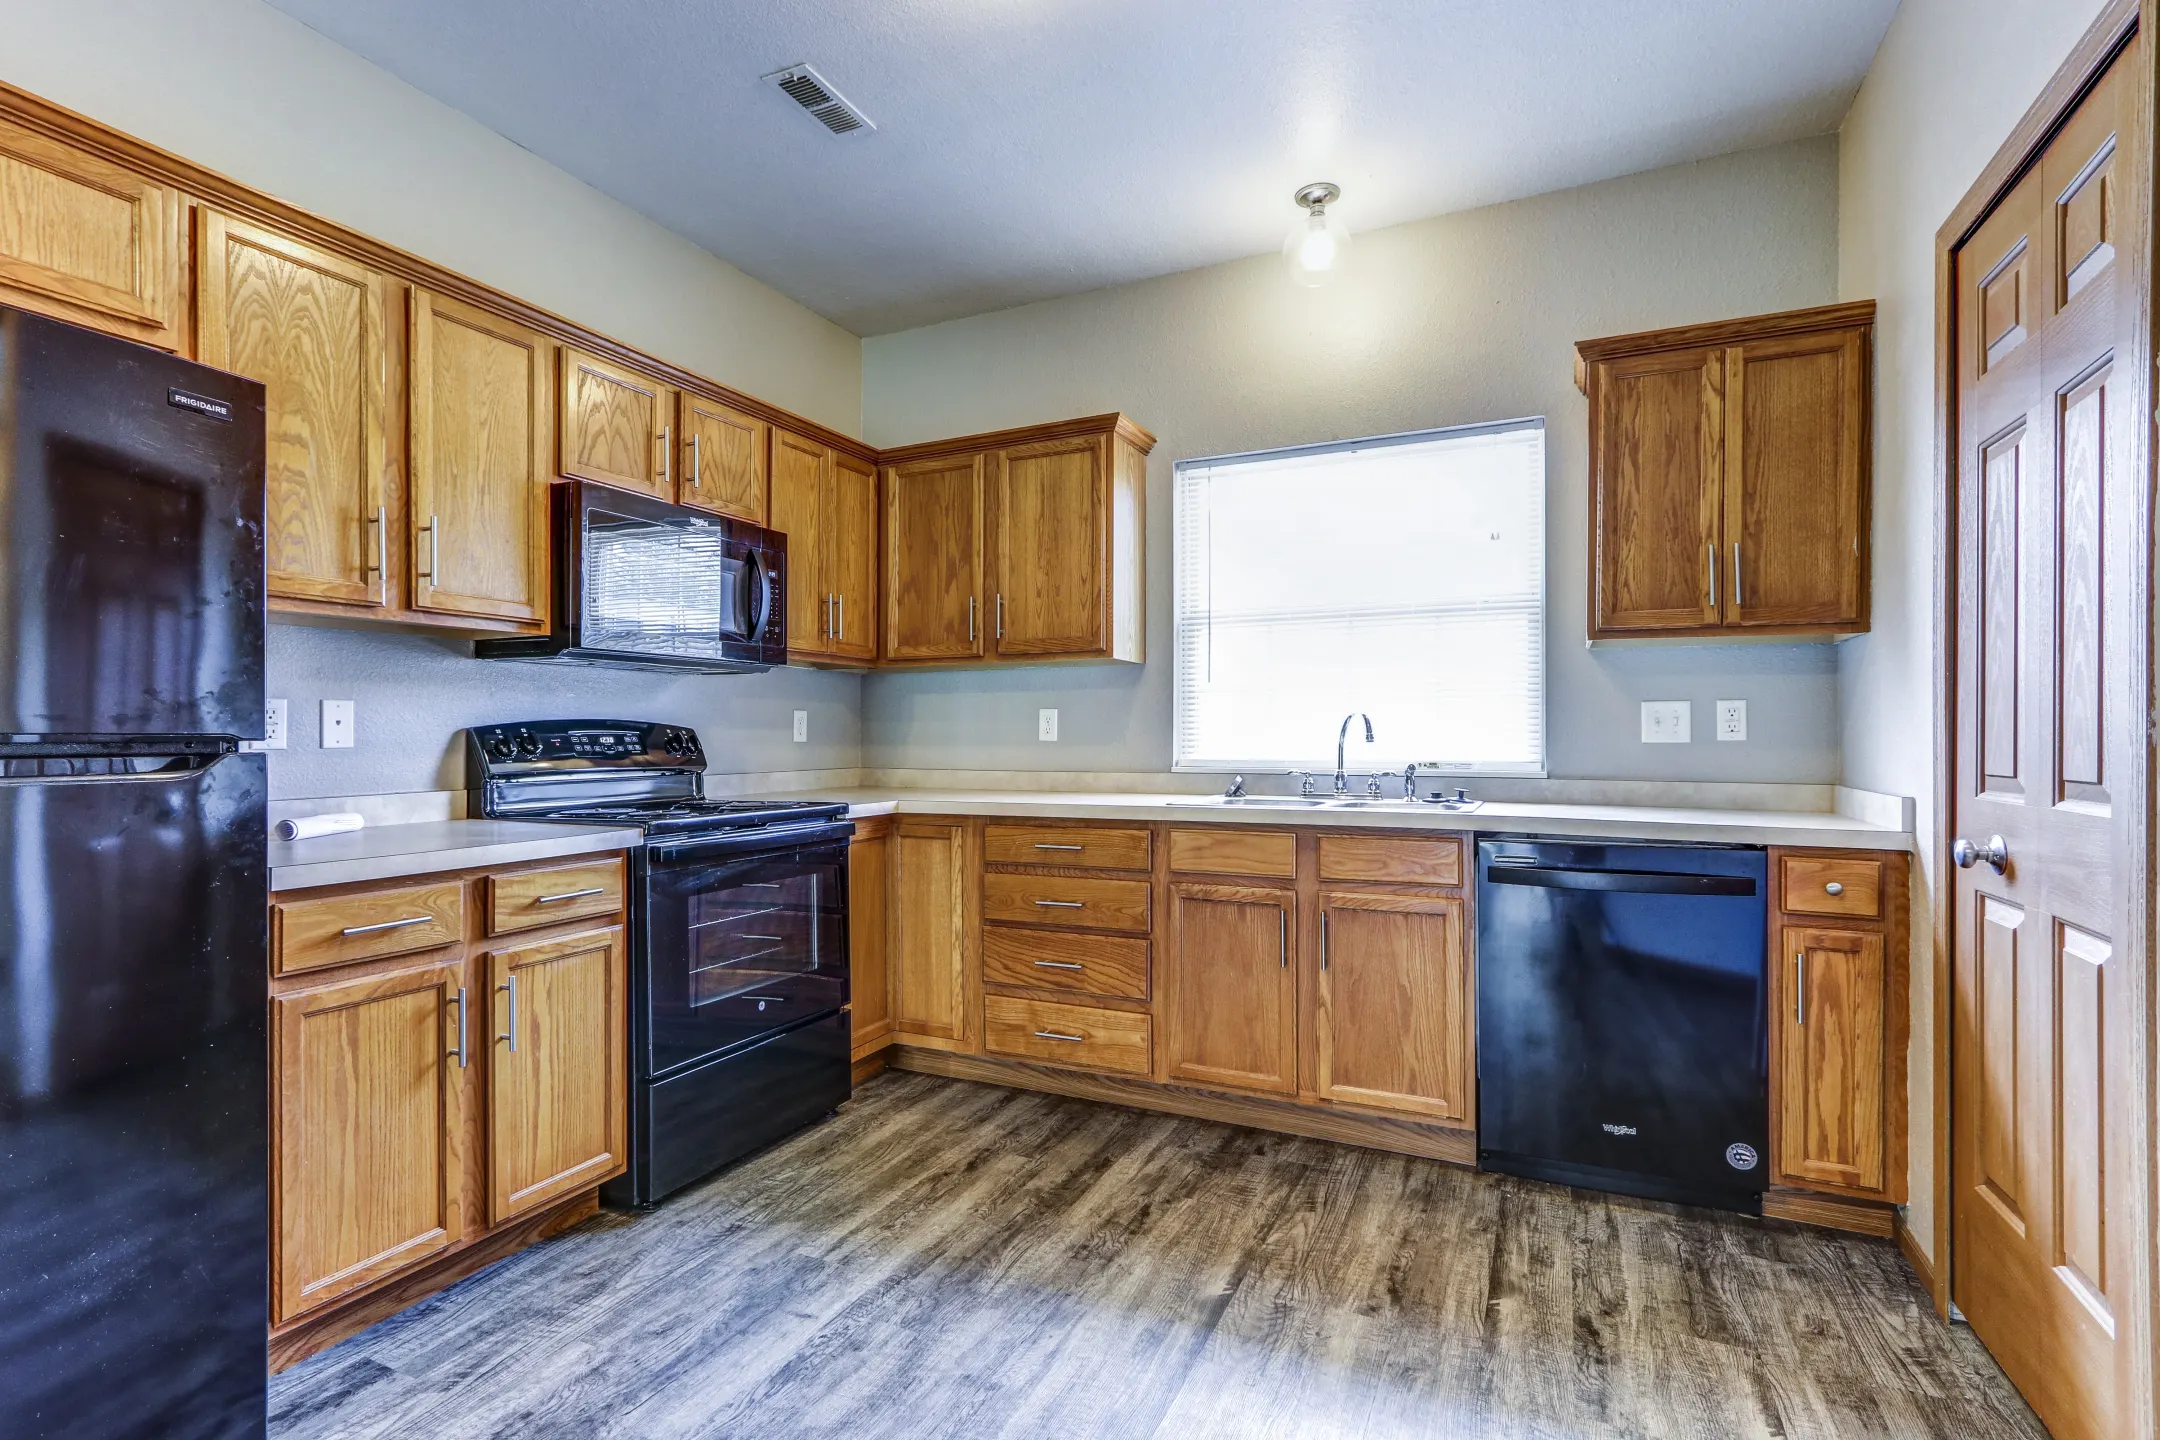 Kitchen - Westridge Apartments And Townhomes - Toledo, OH